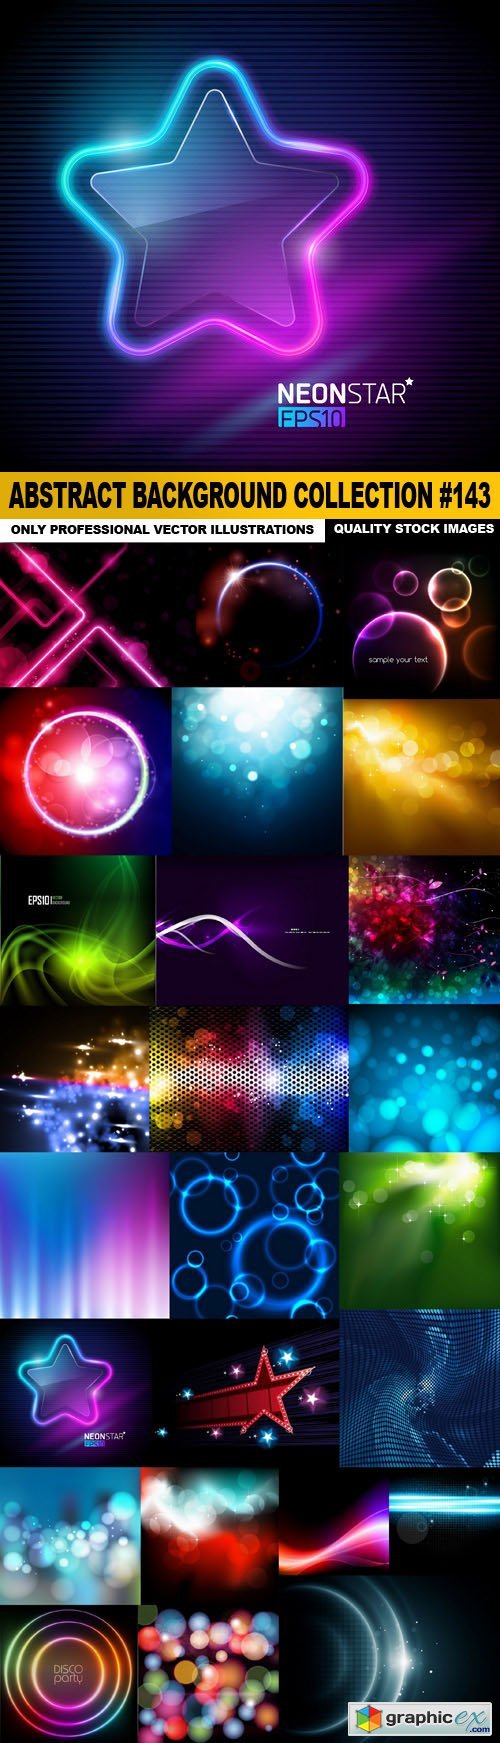 Abstract Background Collection #143